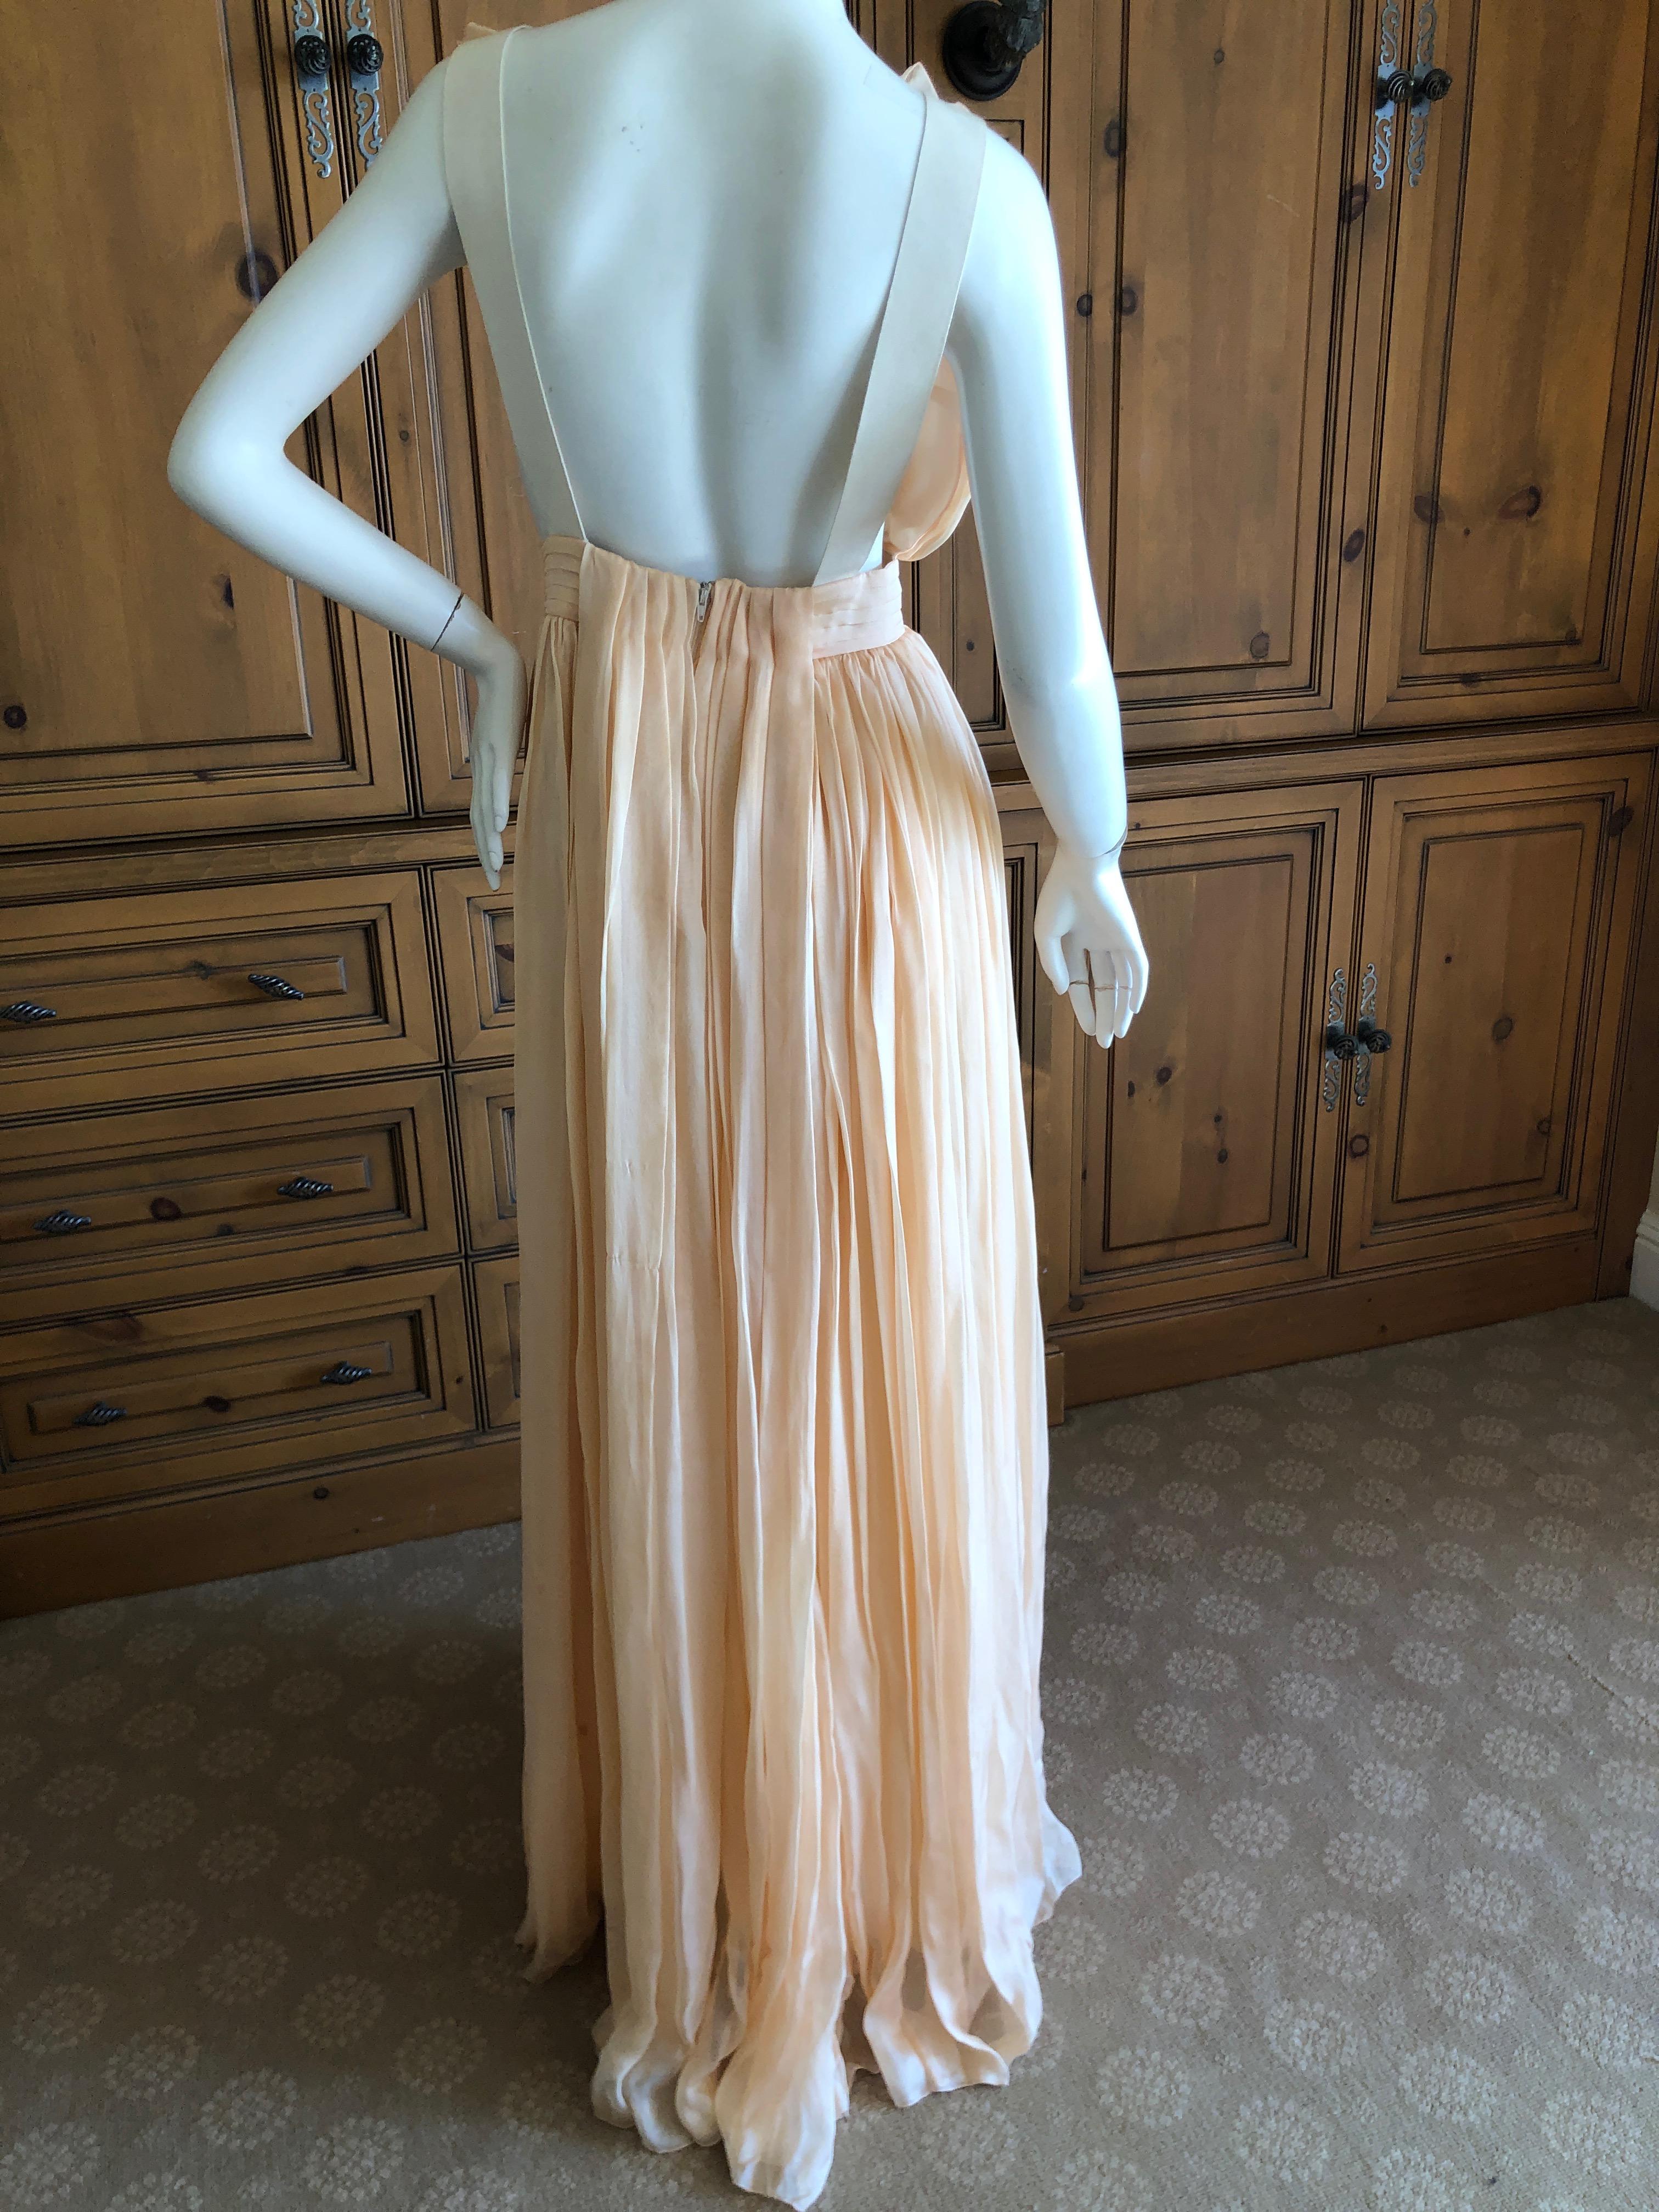 D&G Dolce & Gabbana Romantic Apricot Pink Silk Flowing Low Cut Evening Dress .
This is so beautiful with miles of flowing silk.
There are some holes in the lower back of the dress, see last photos.They are not apparent , they are lost in the